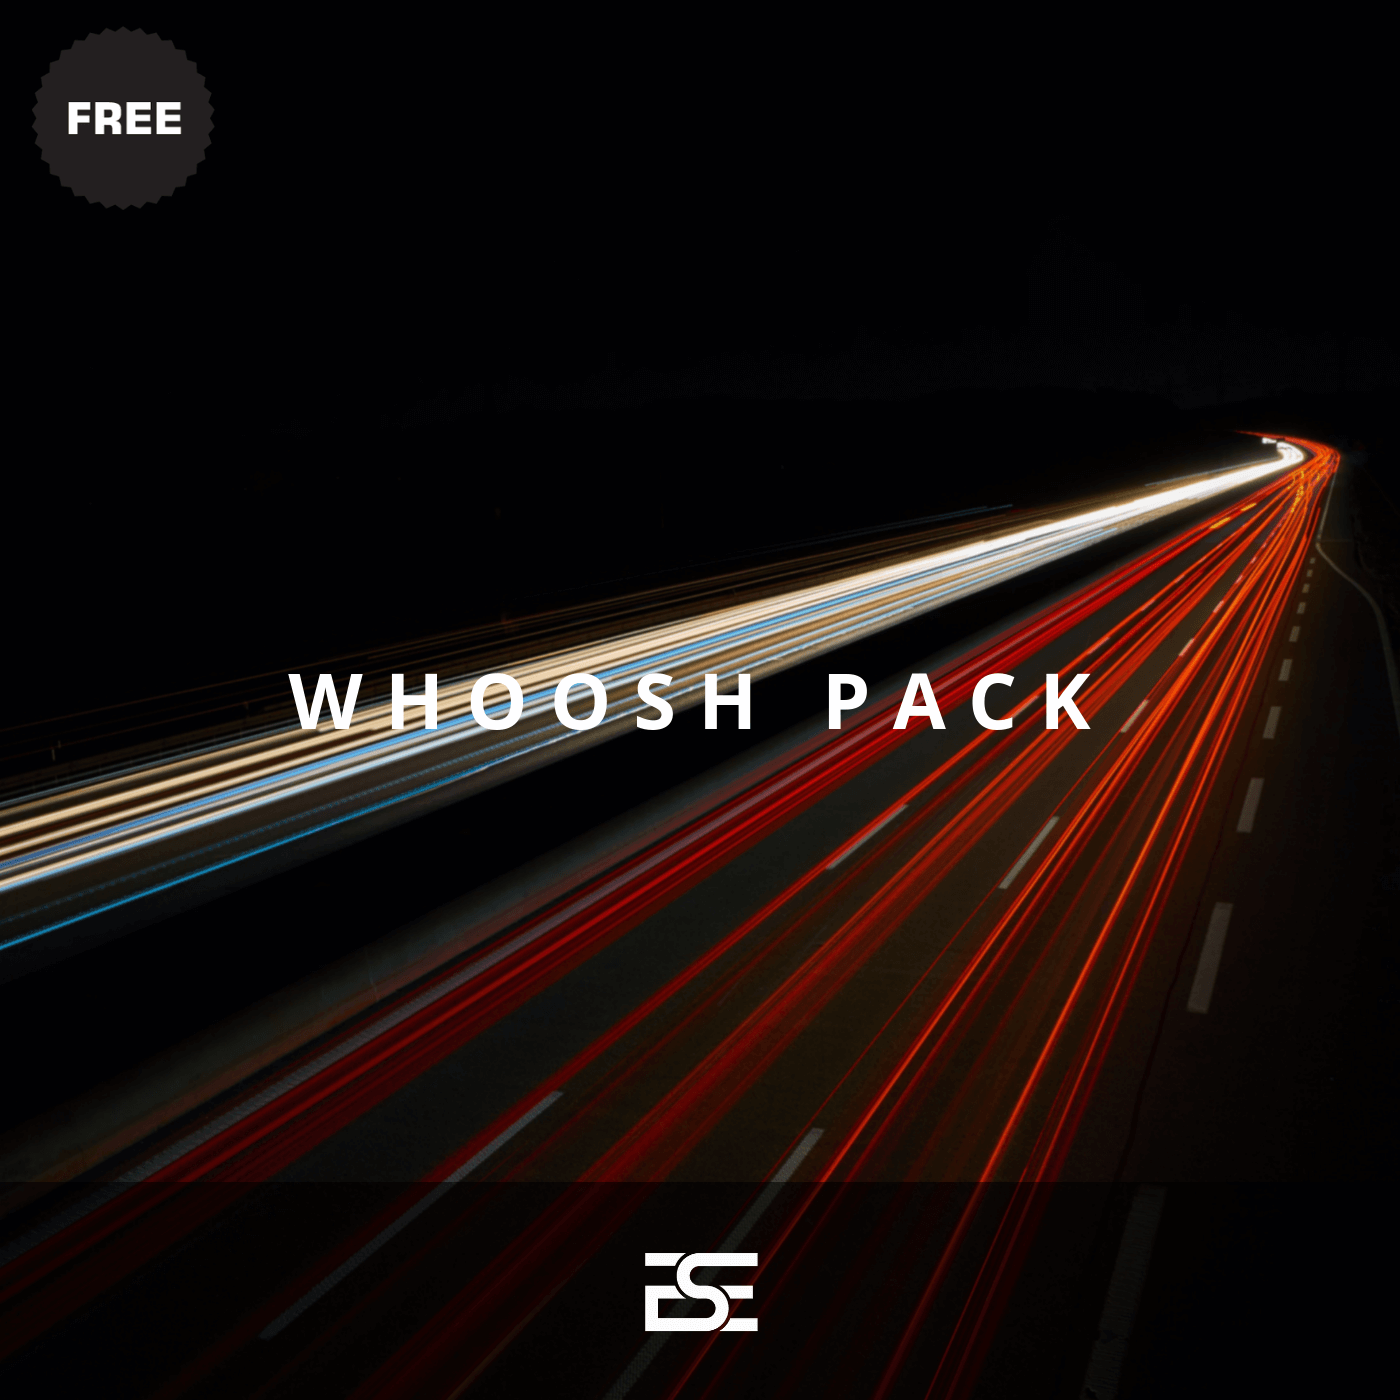 FREE Cinematic Transition Sound Effects Pack - 15 Swooshes and Whooshes